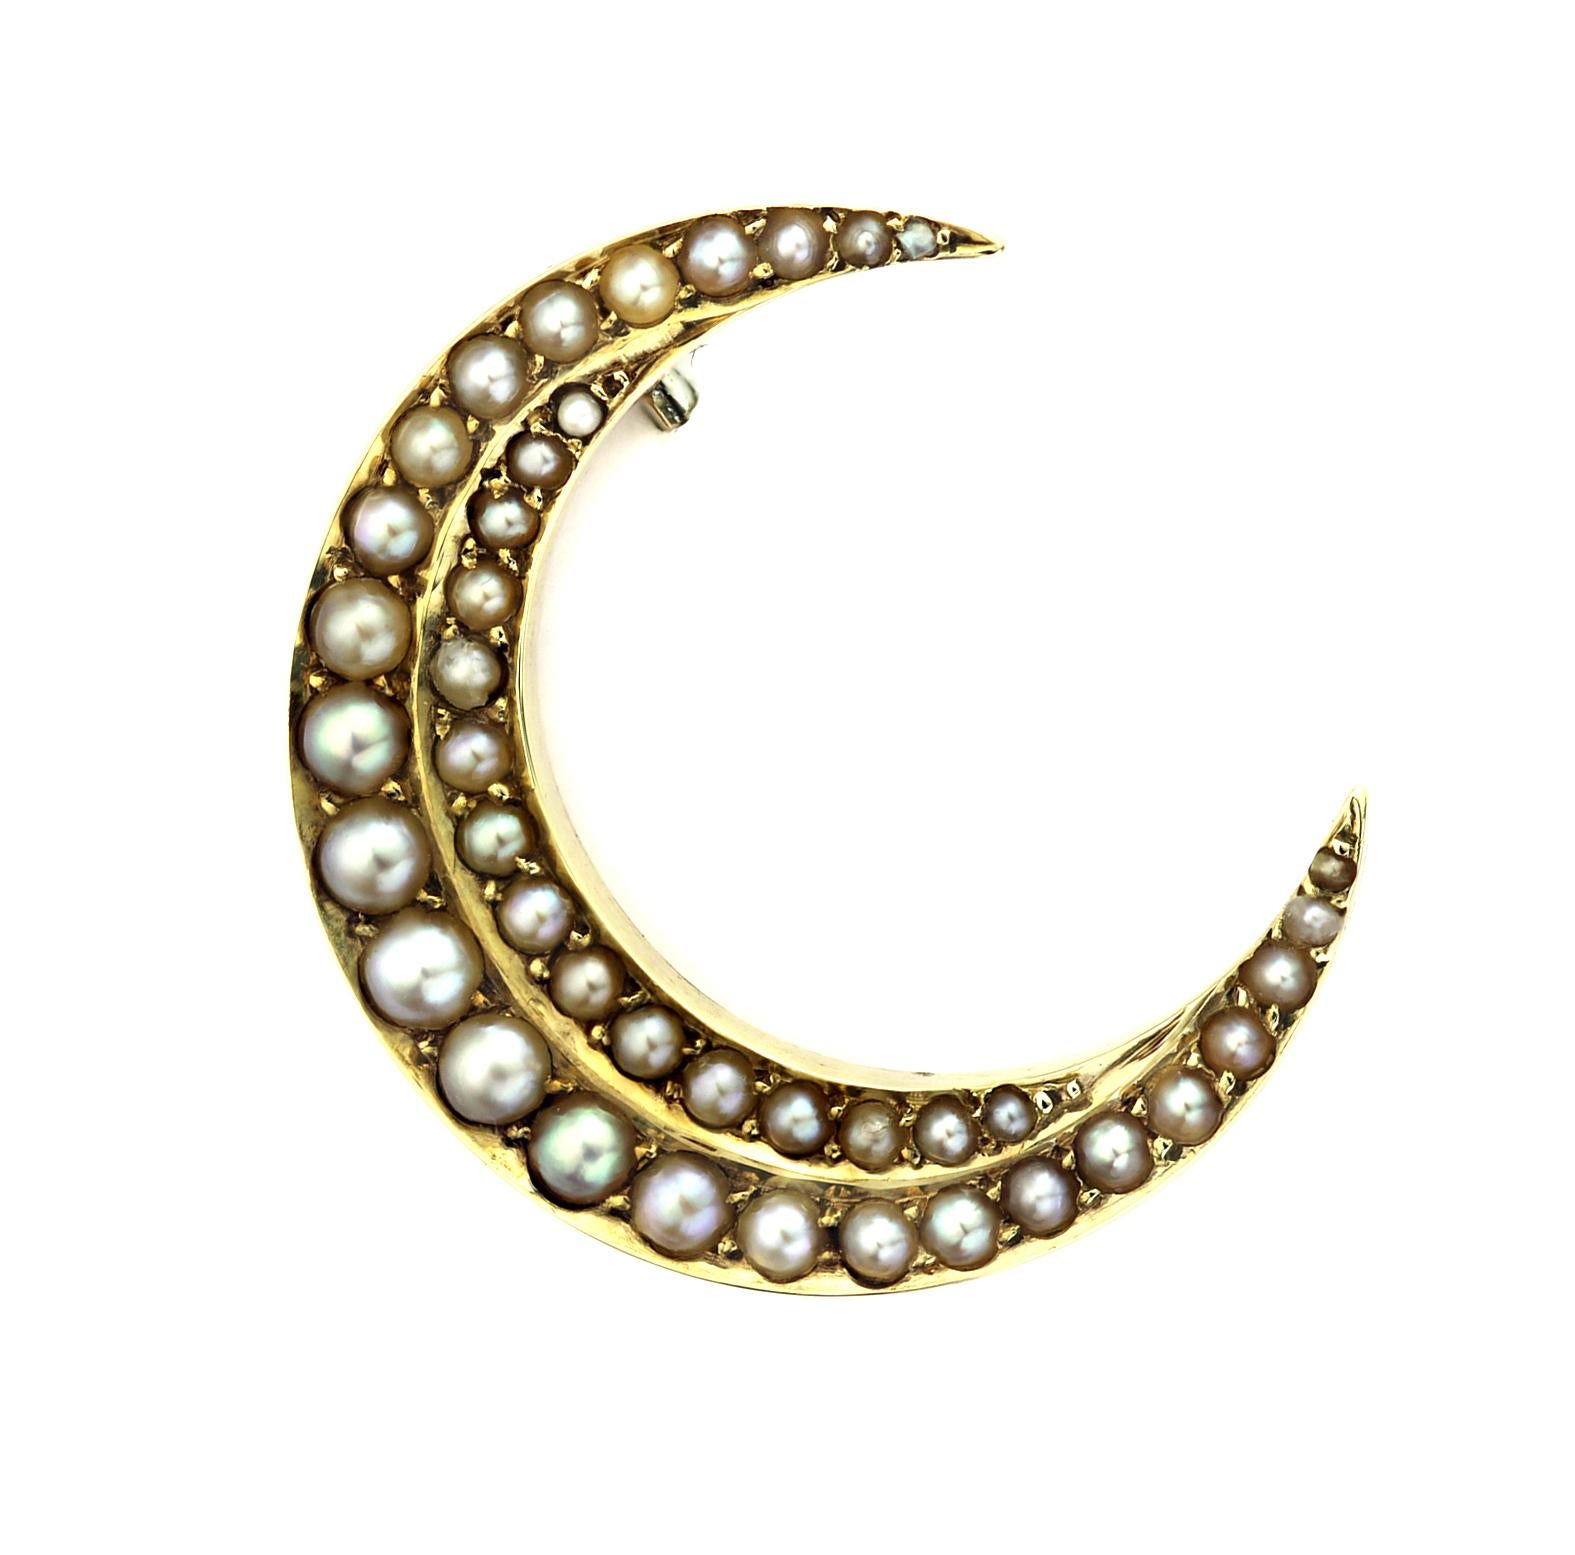 Uncut Antique Victorian Crescent Moon Brooch with Natural Pearls in 15 Karat Gold